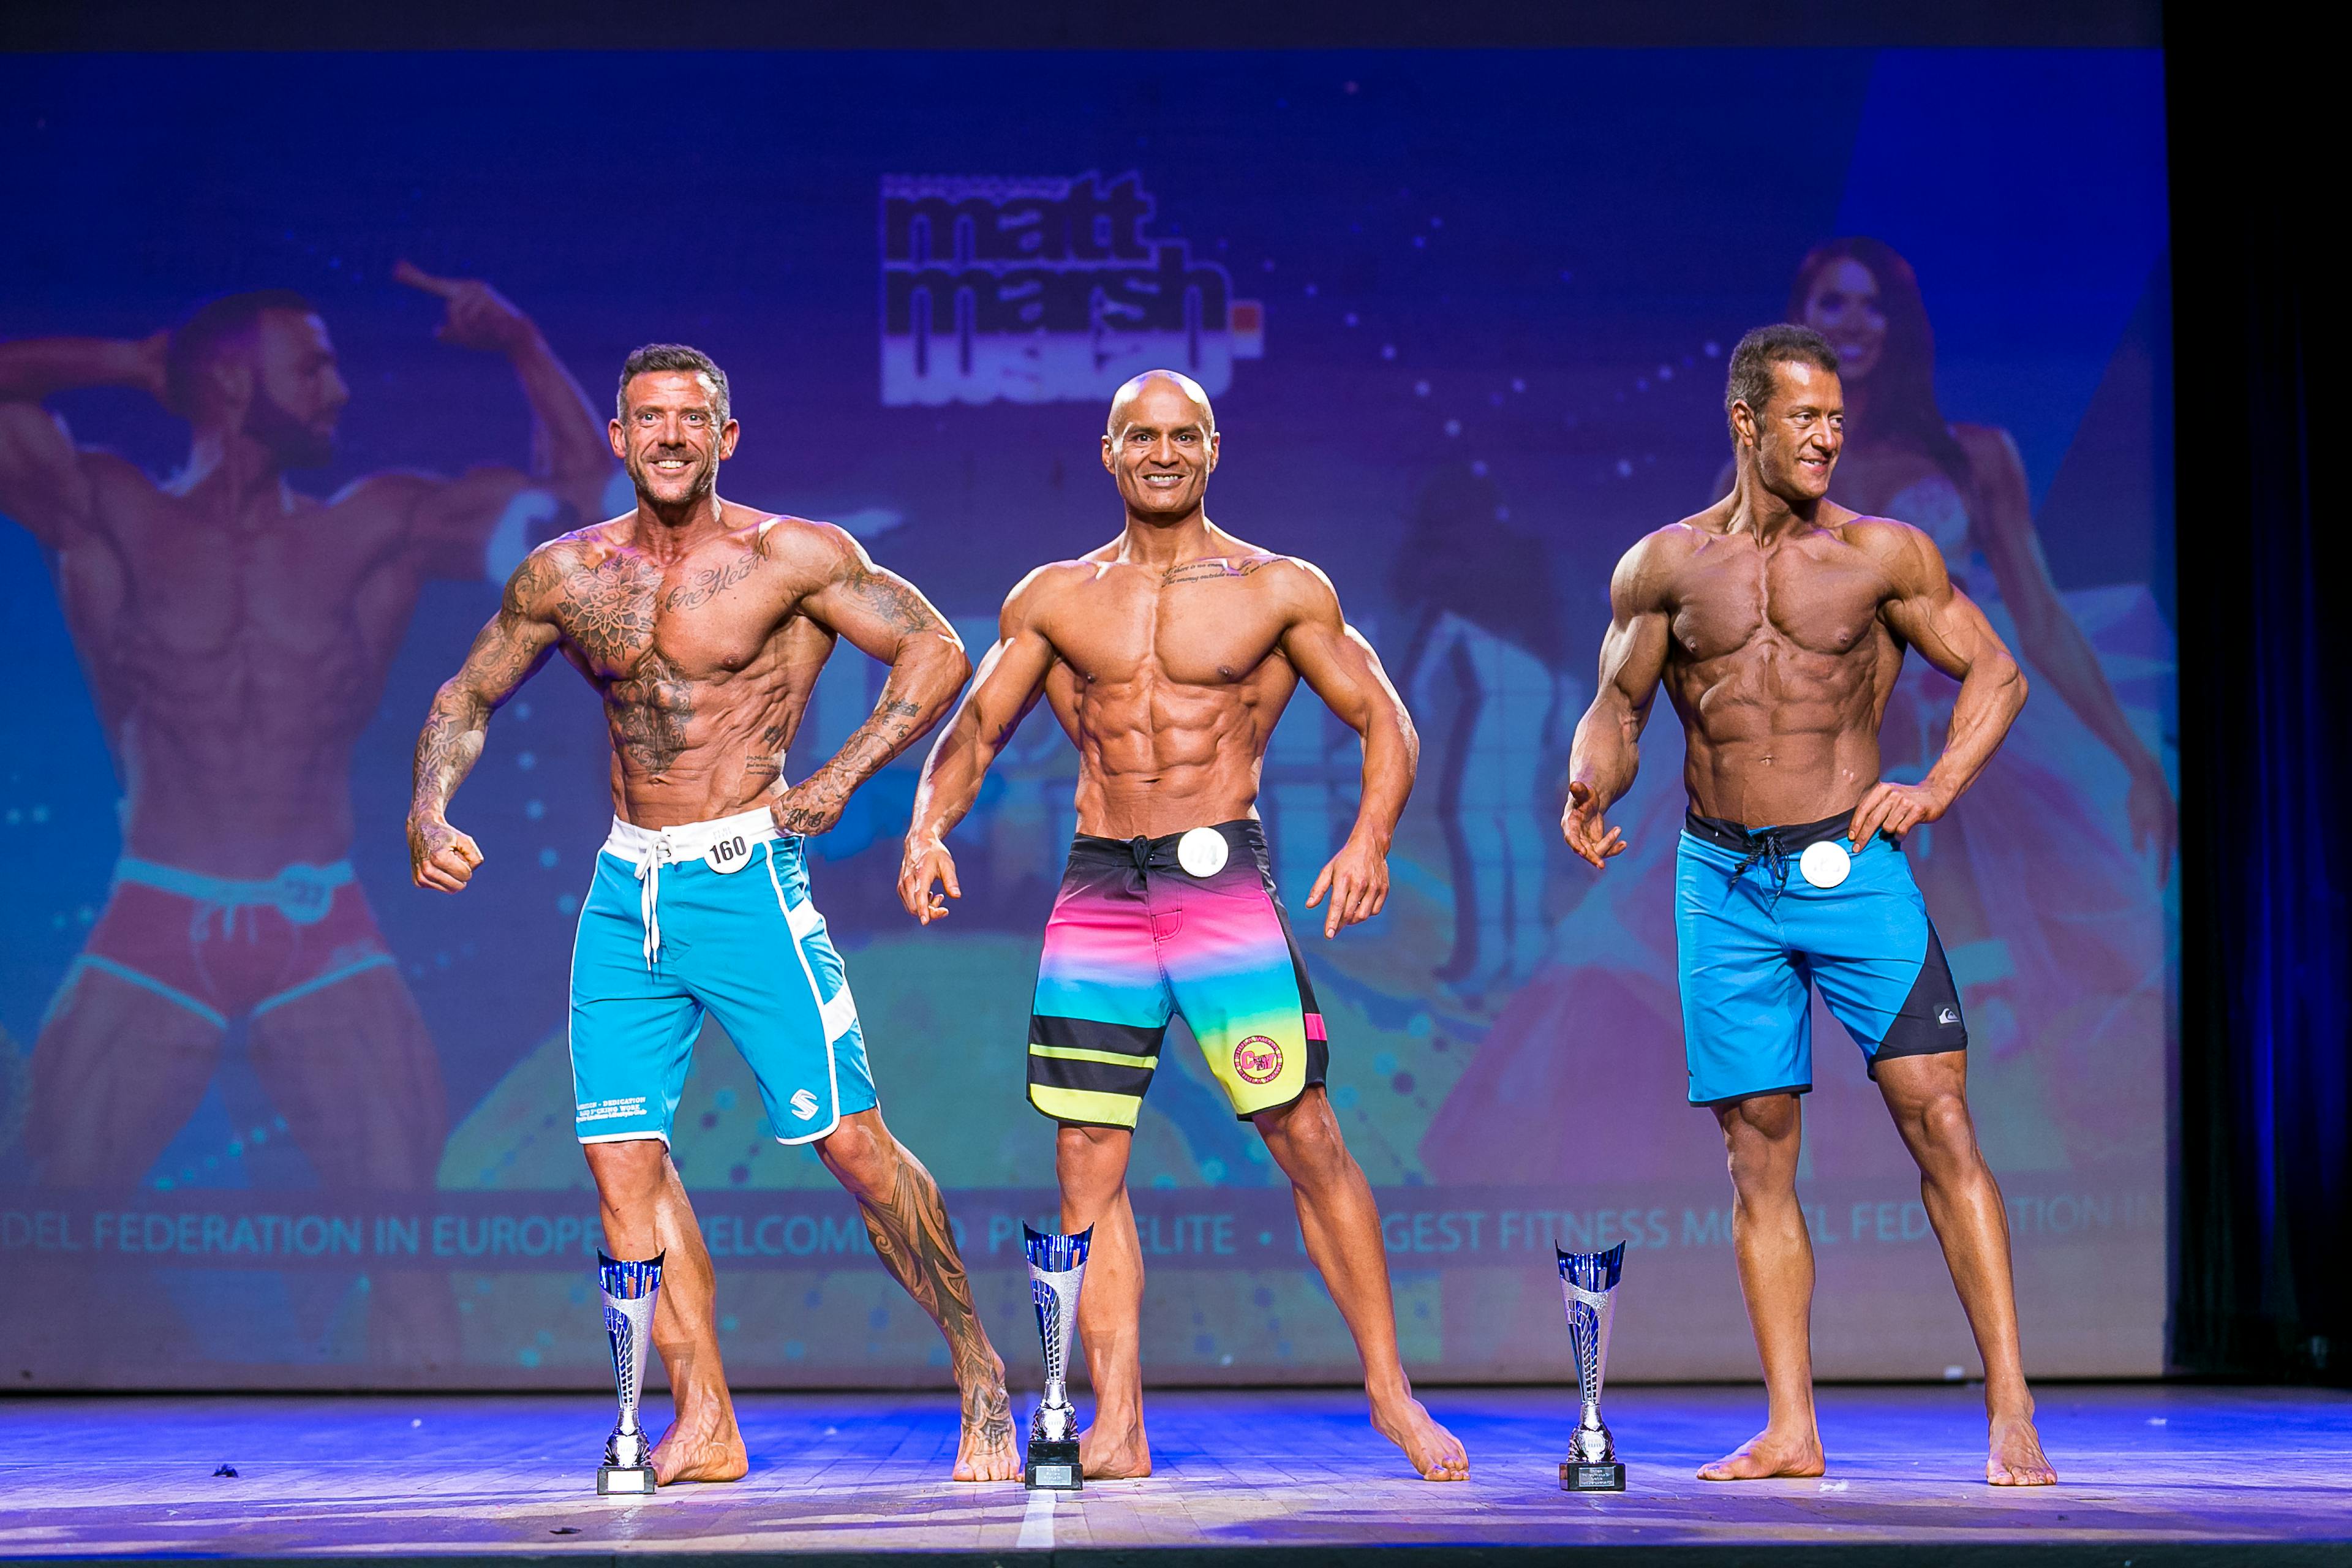 Kishore Naib competing in men's physique pro show 2 at Pure Elite